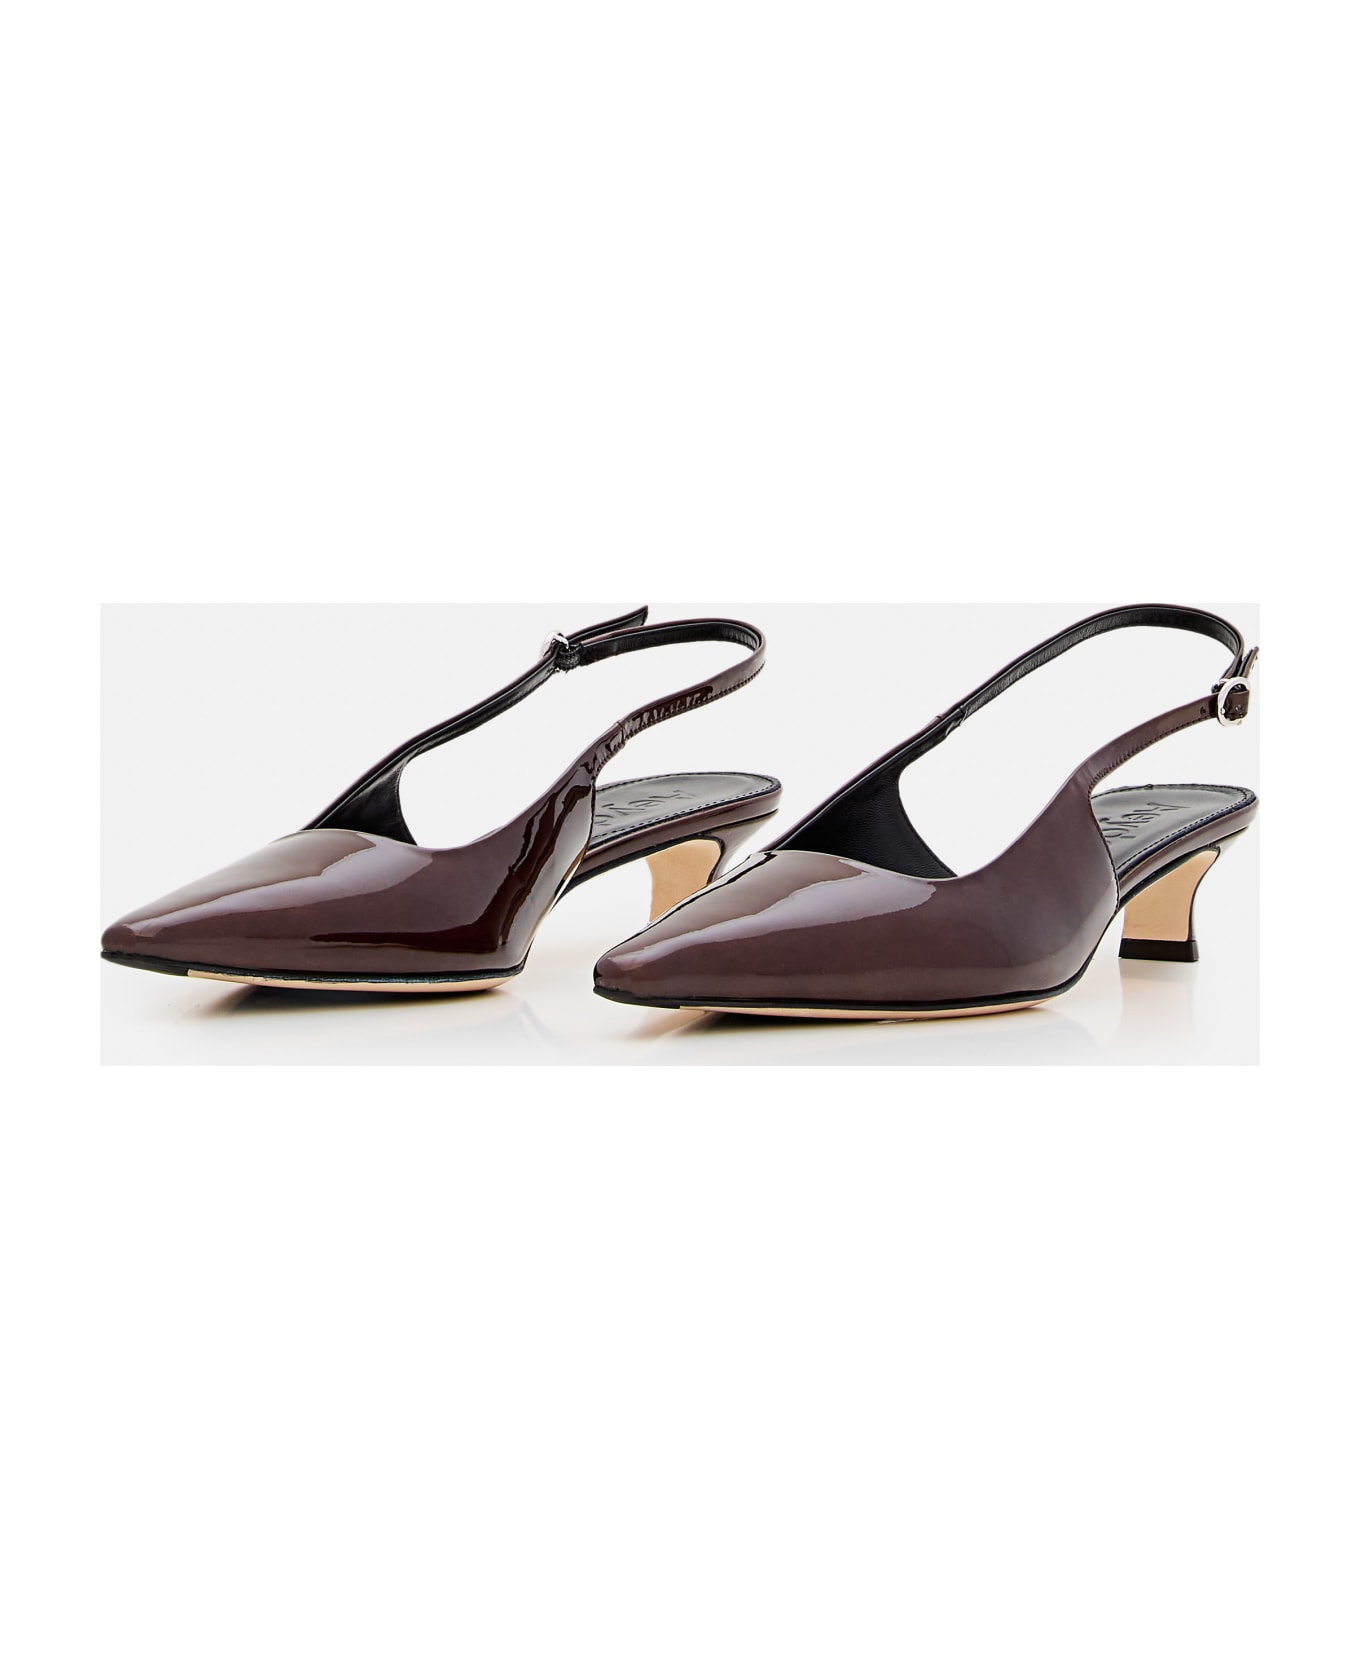 aeyde 35mm Catrina Patent Calf Leather Slingback - Brown